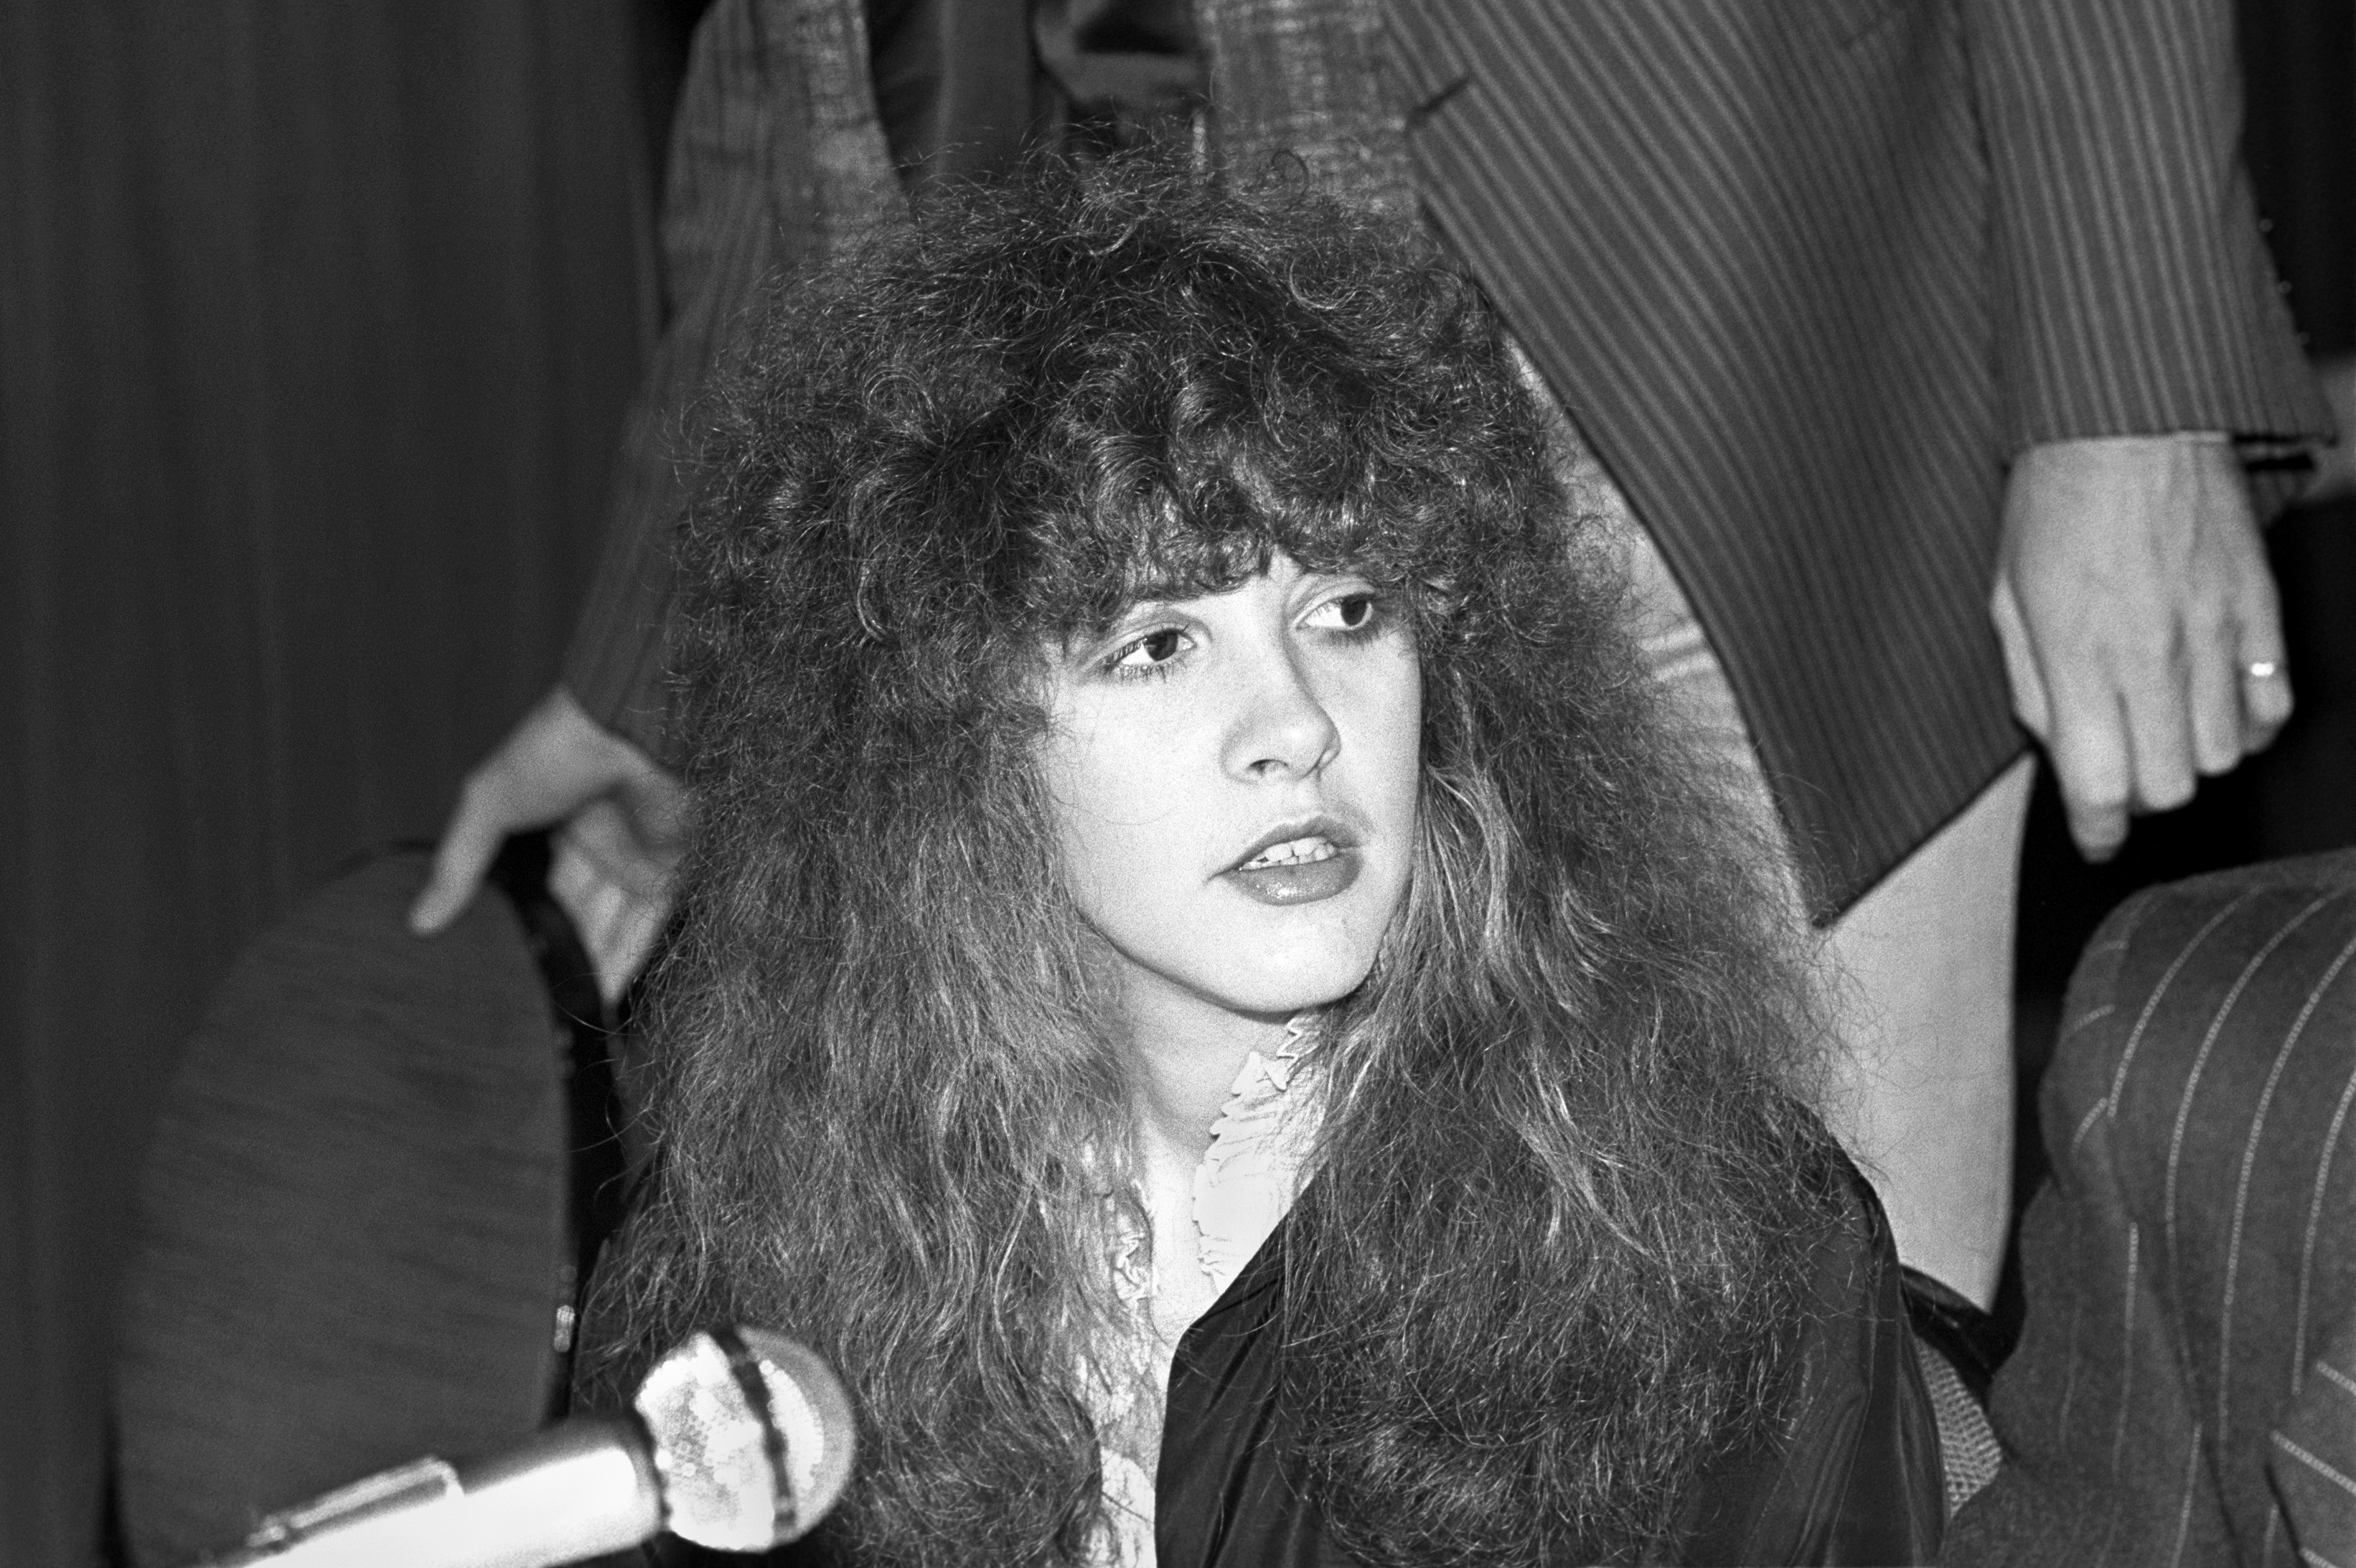 Stevie Nicks wears a black jacket and white shirt and sits in front of a microphone.